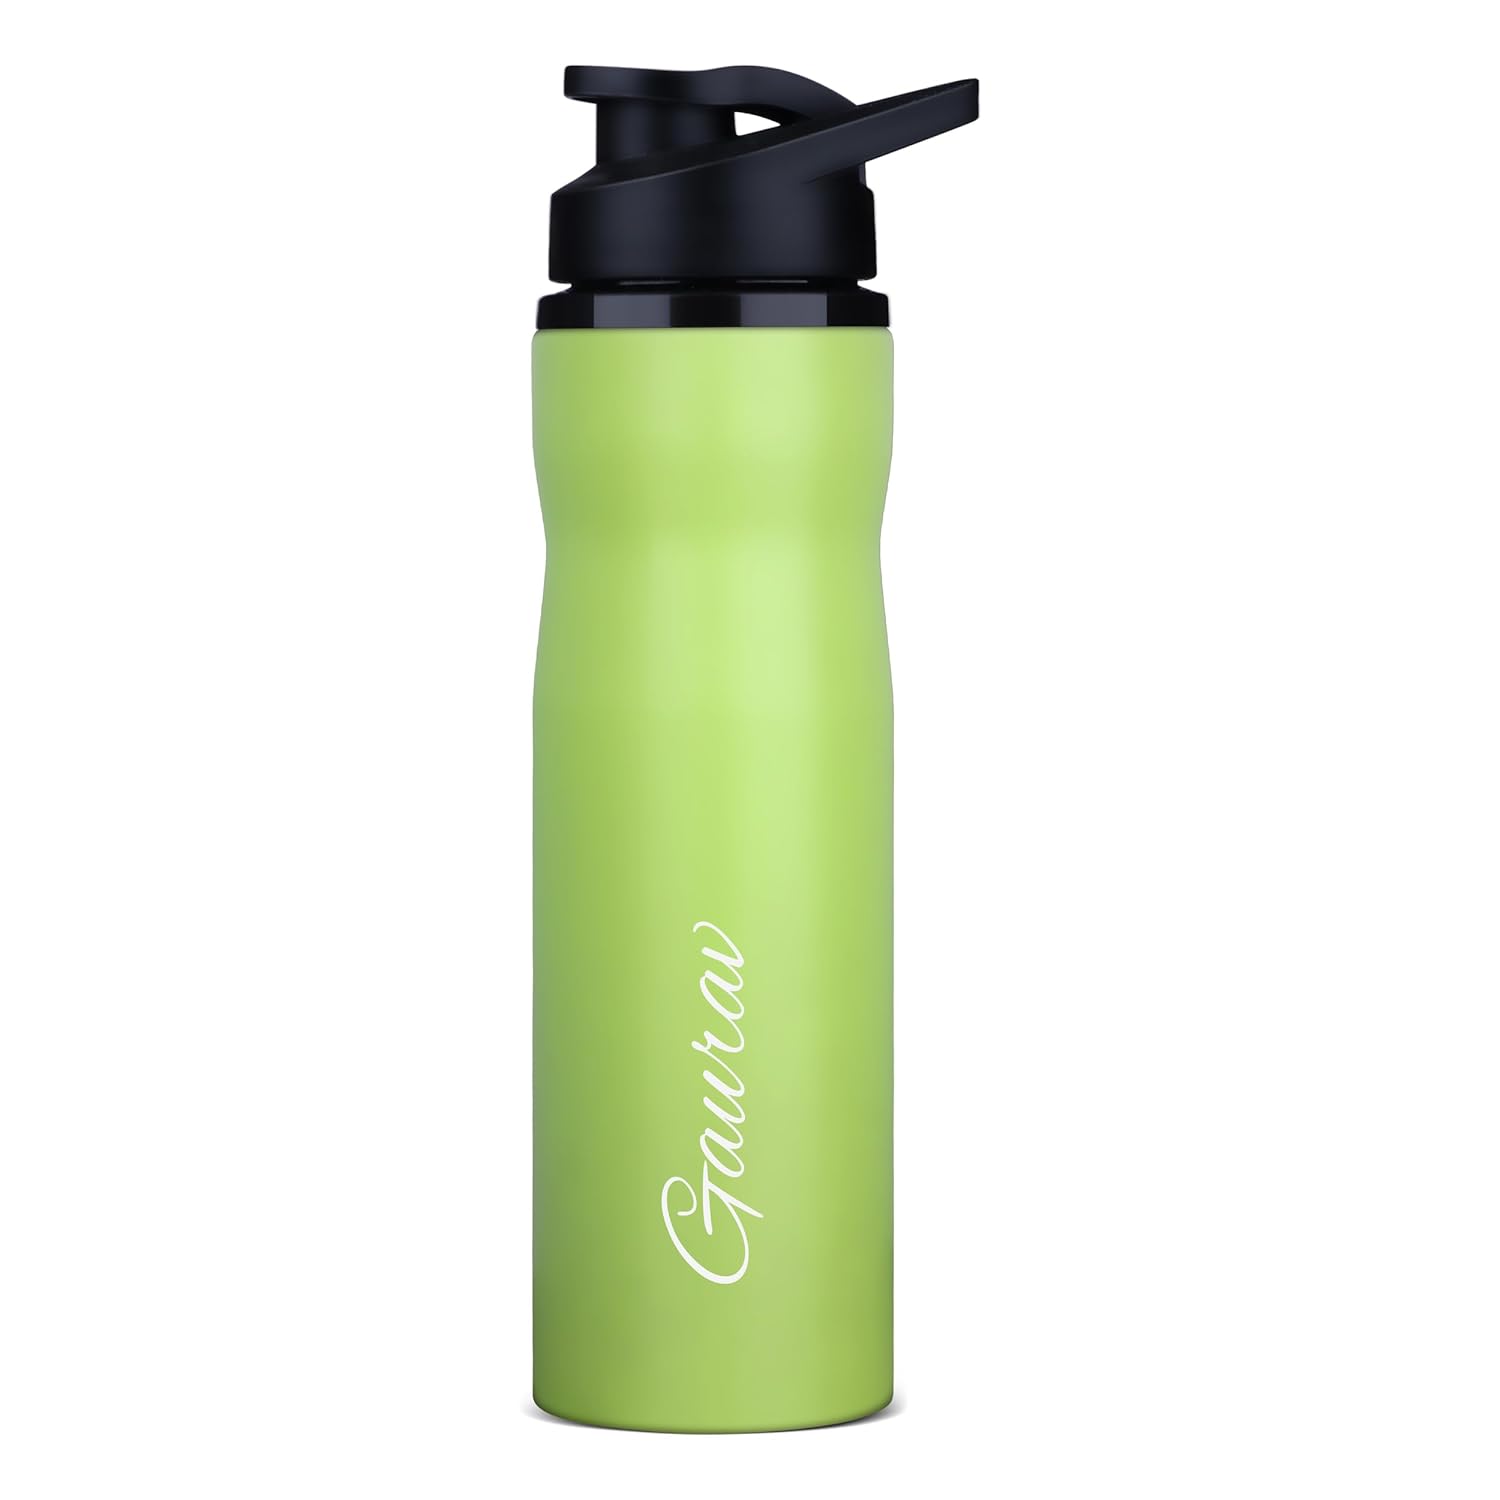 Personalized Neon Stainless Steel Sipper Water Bottle - Green